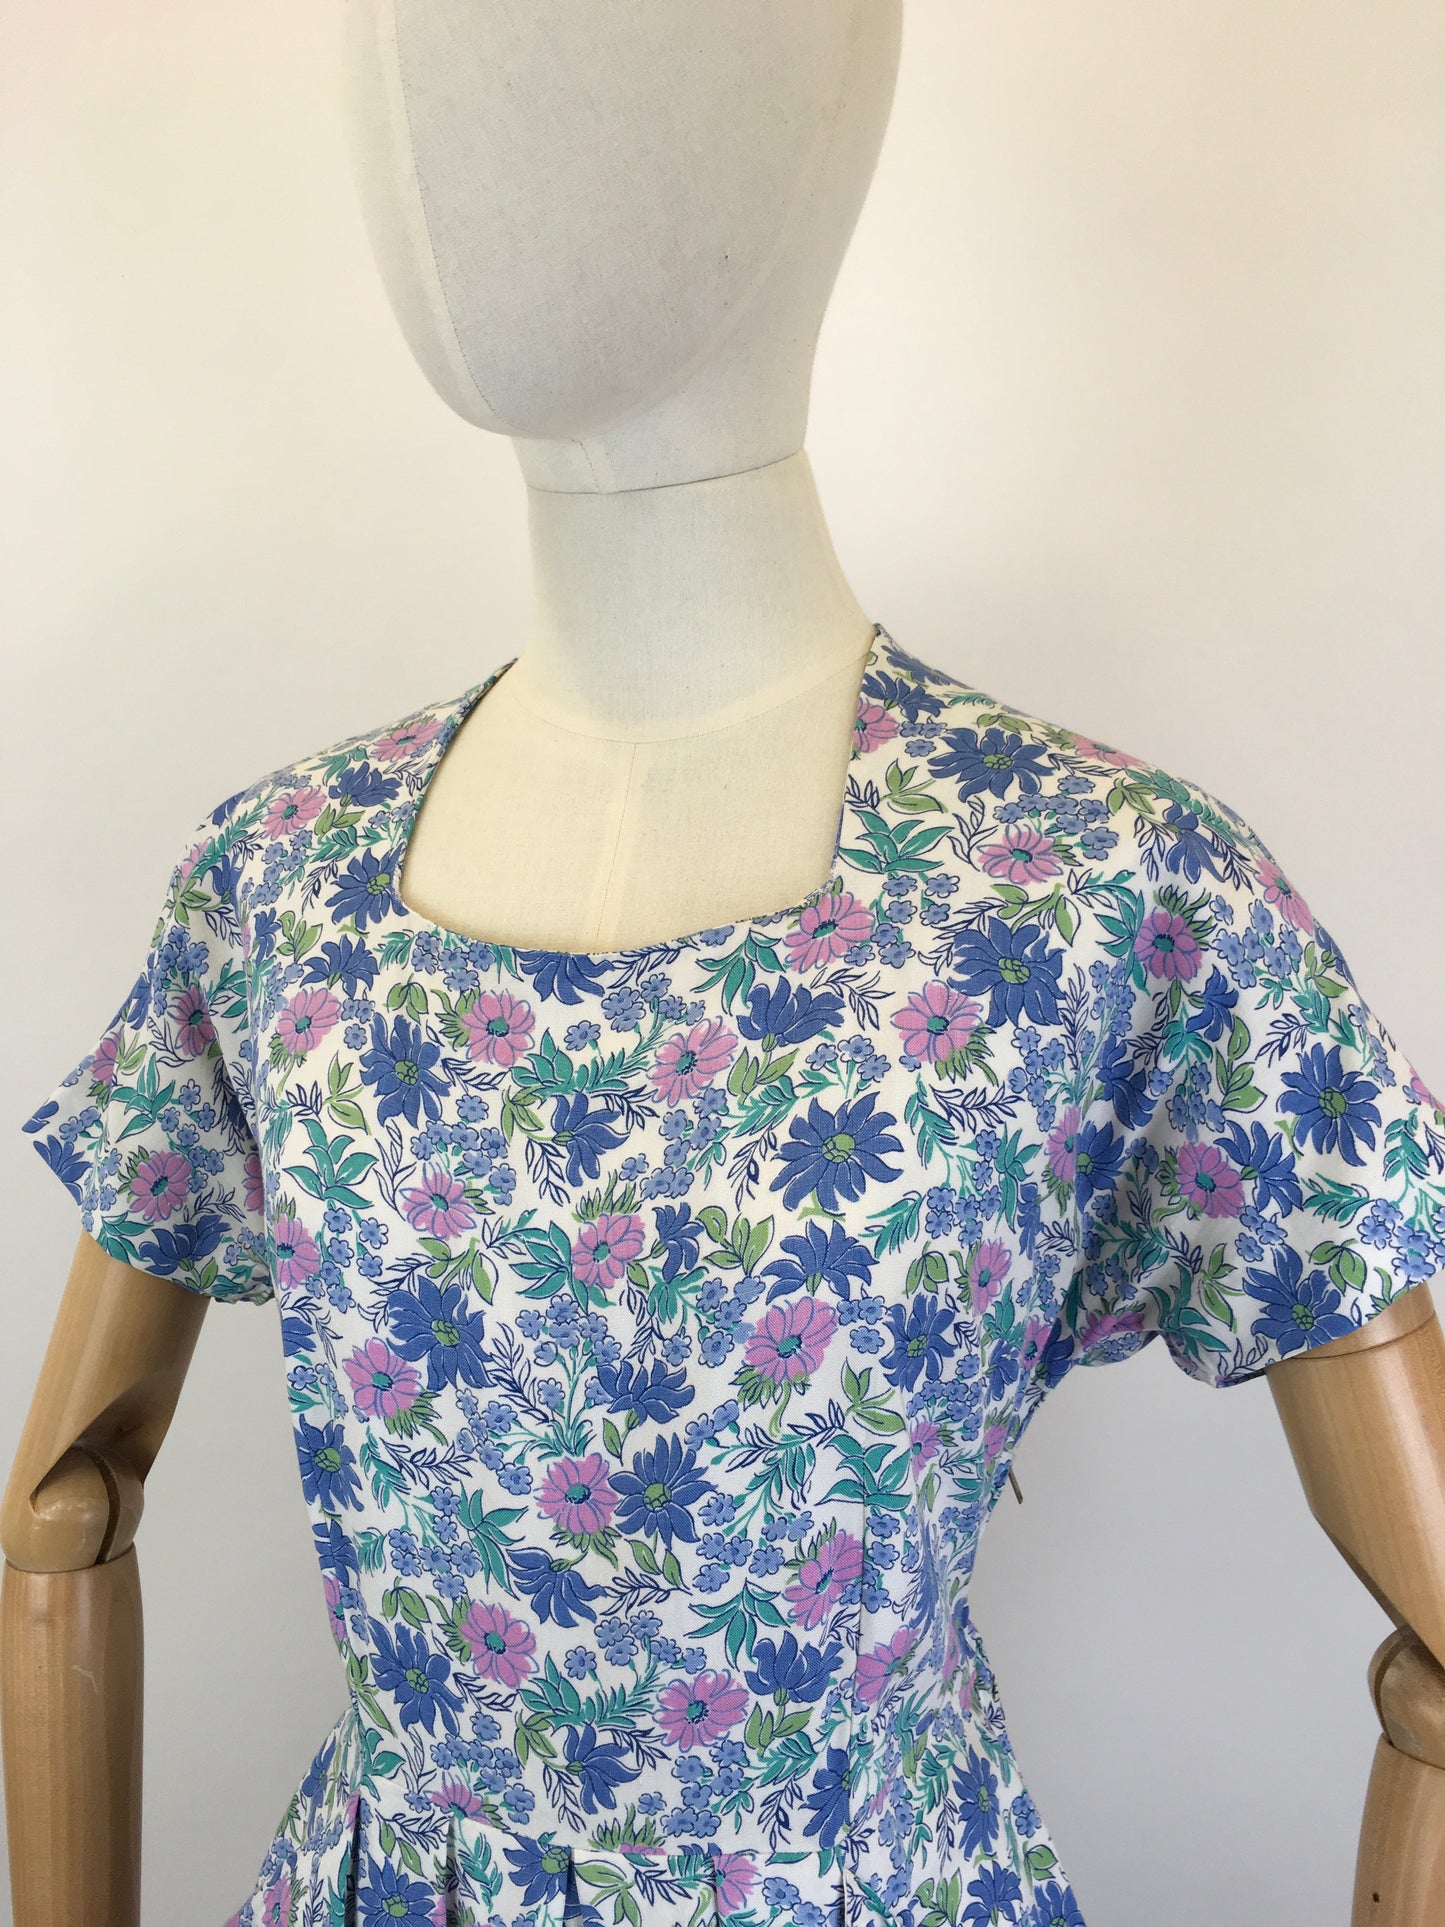 Original 1940’s Gorgeous Floral Cotton Day Dress - In Summertime Blues, Pinks, Purples & Greens